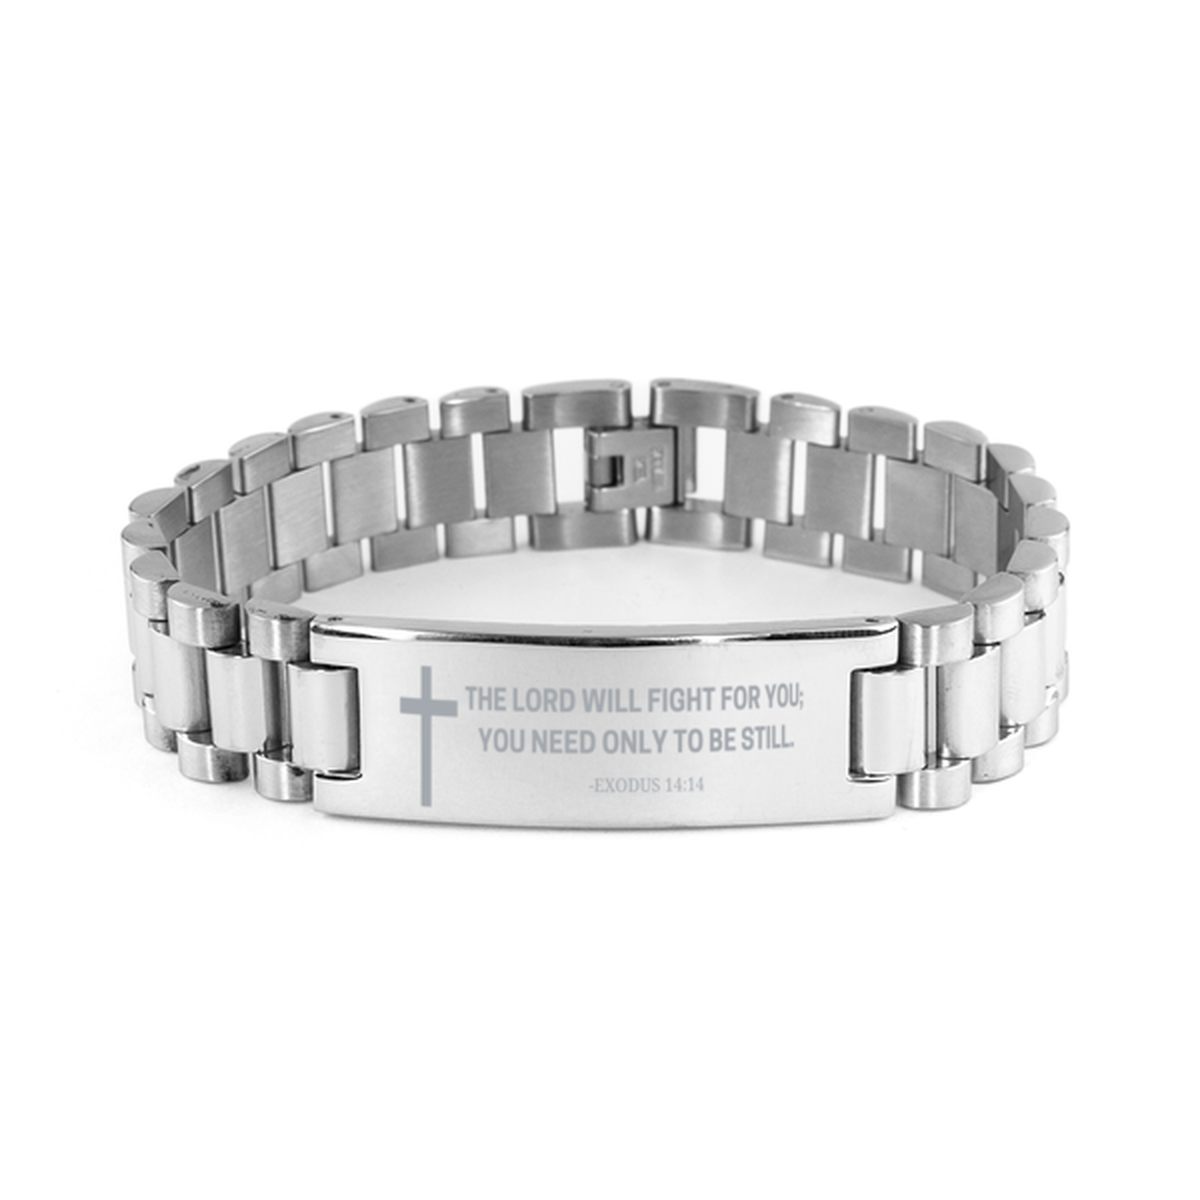 Baptism Gifts For Teenage Boys Girls, Christian Bible Verse Ladder Stainless Steel Bracelet, The Lord will fight for you, Catholic Confirmation Gifts for Son, Godson, Grandson, Nephew